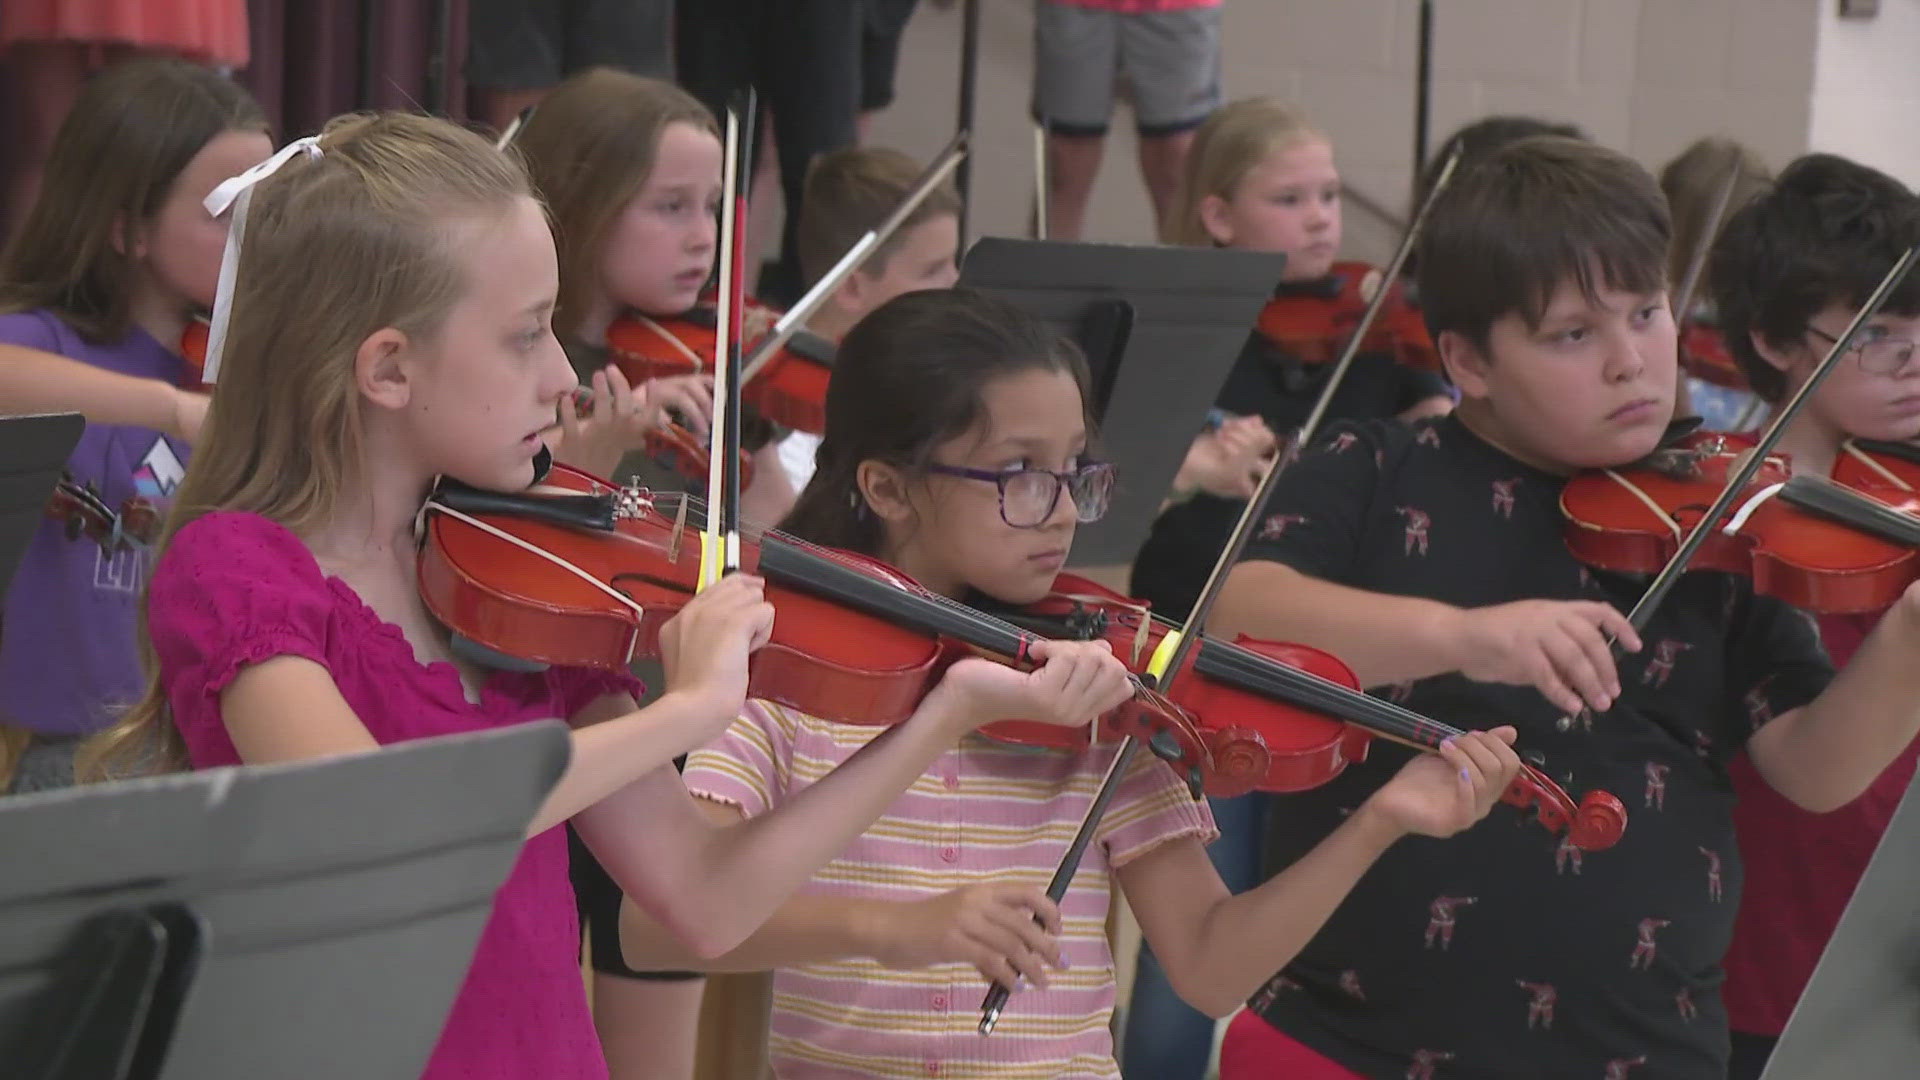 For this school music program, students learn about more than just music.